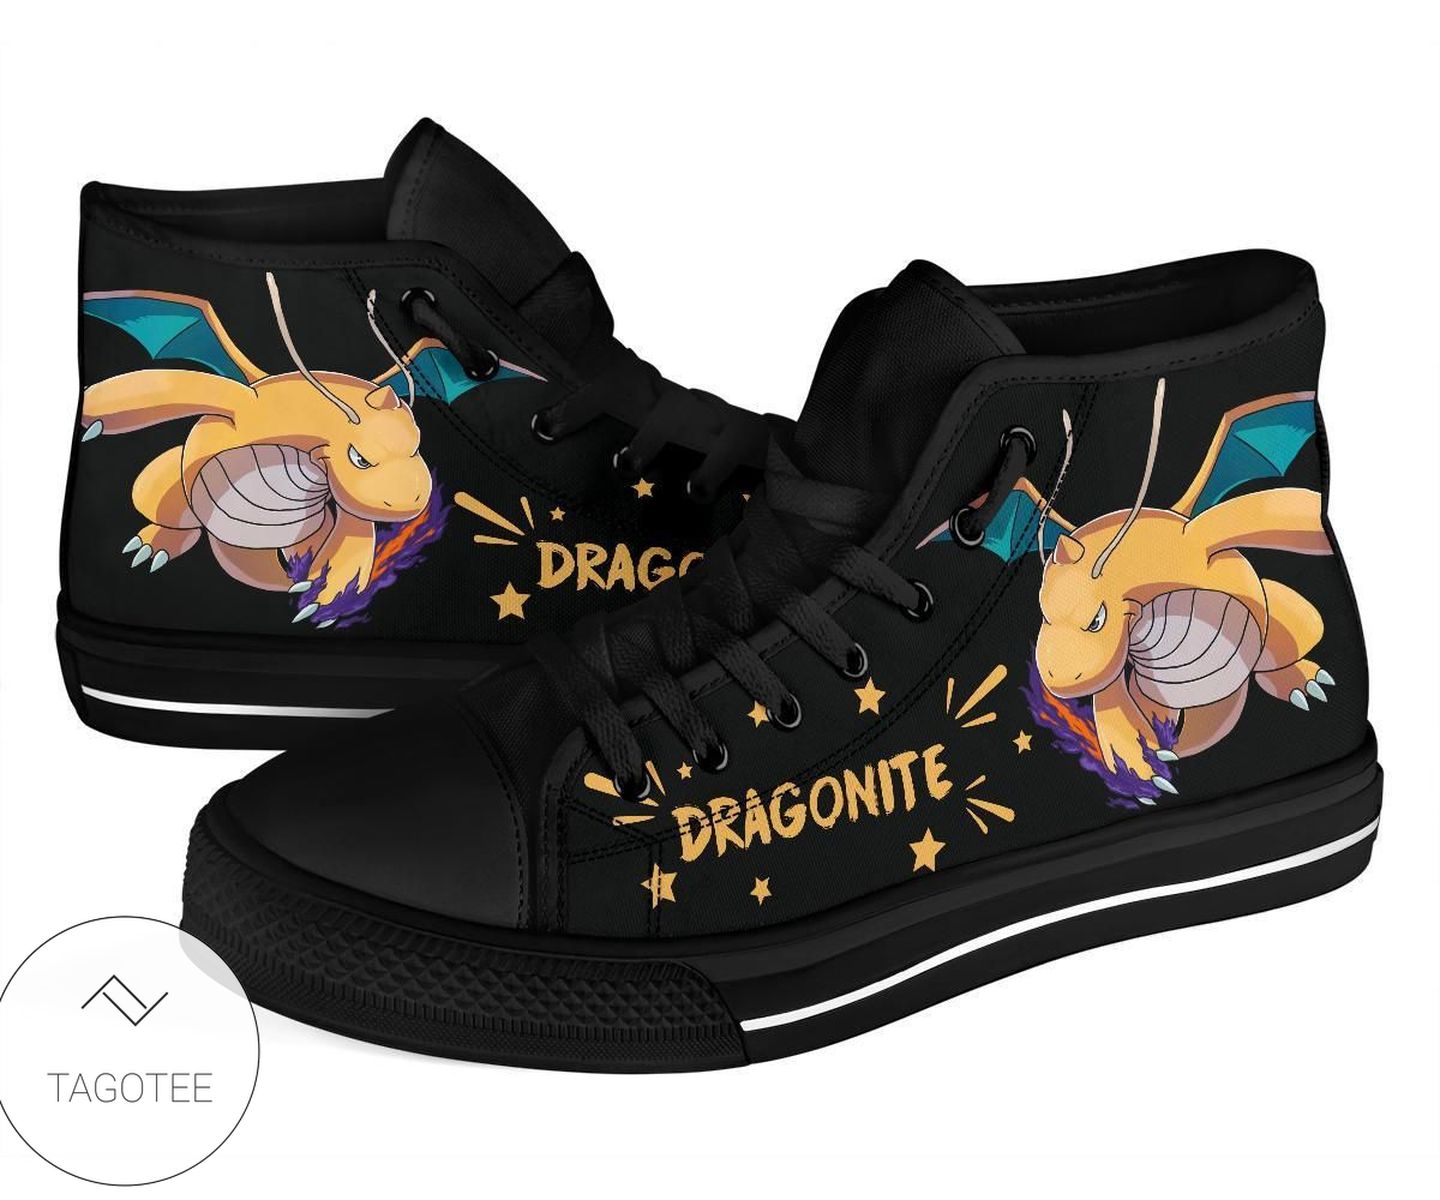 Dragonite Sneakers Pokemon High Top Shoes Gift Idea High Top Shoes